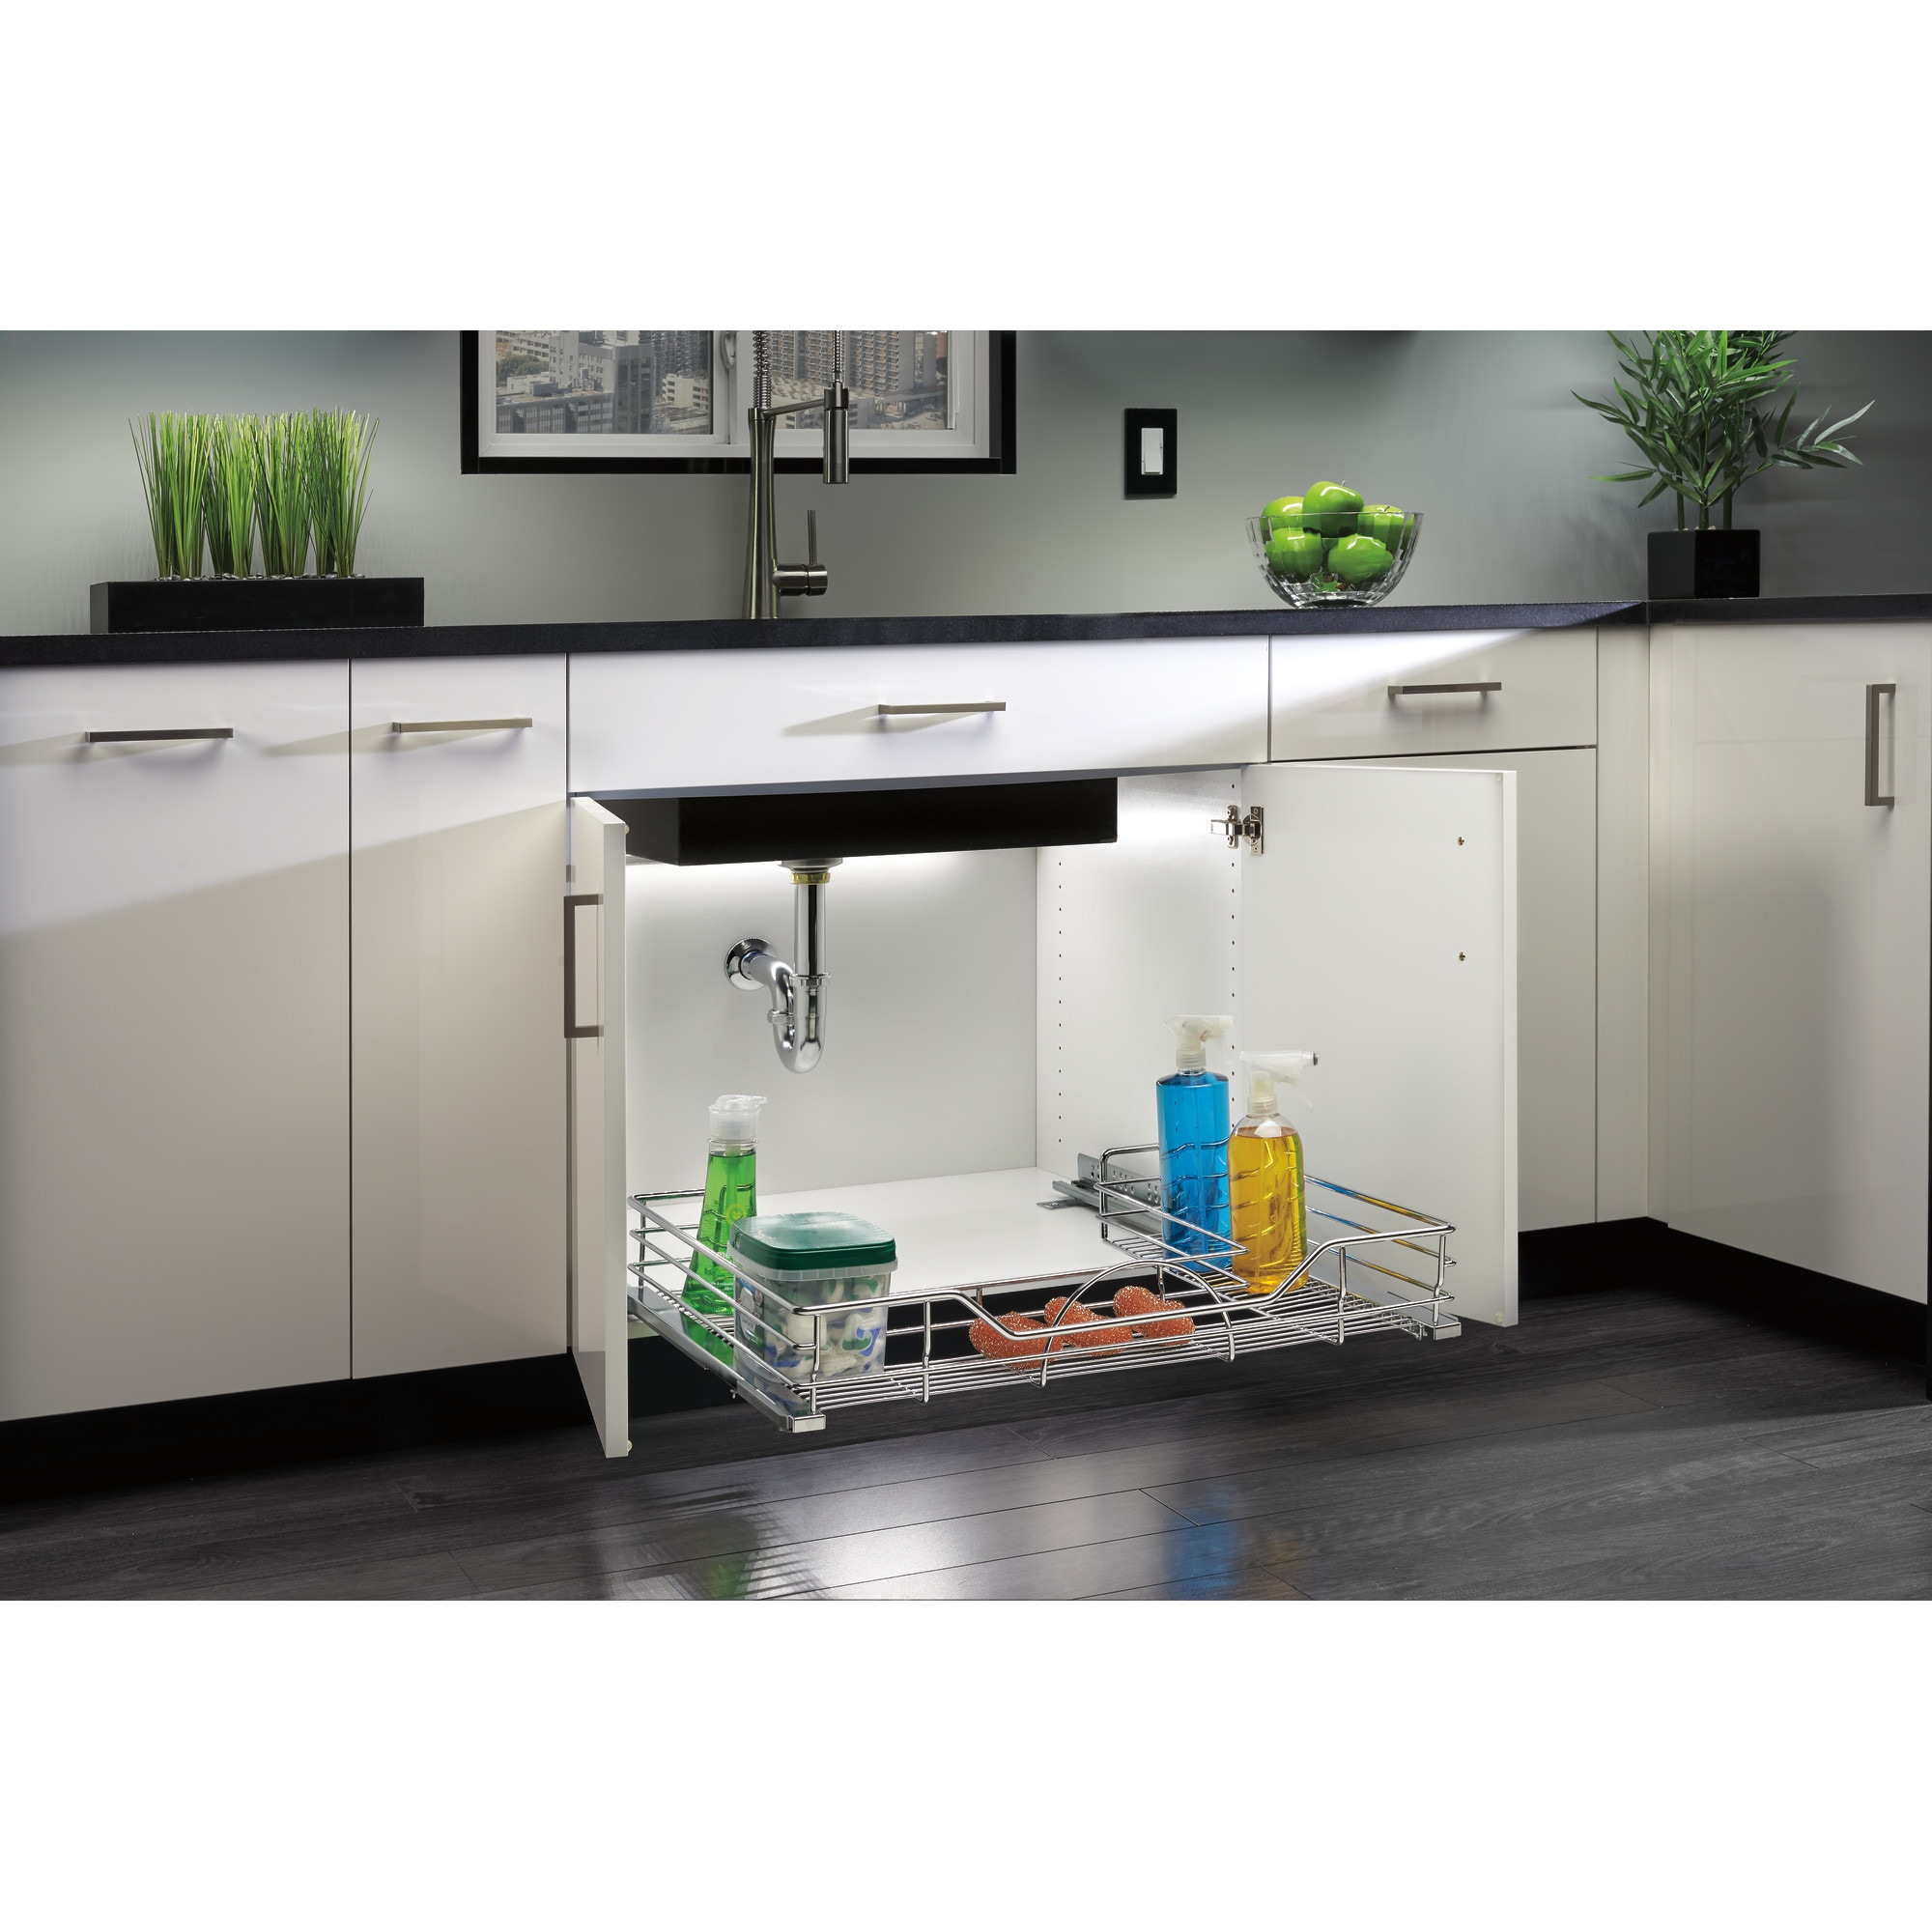 Rev-A-Shelf Undersink Pull Out Cleaning Organizer with Soft Close